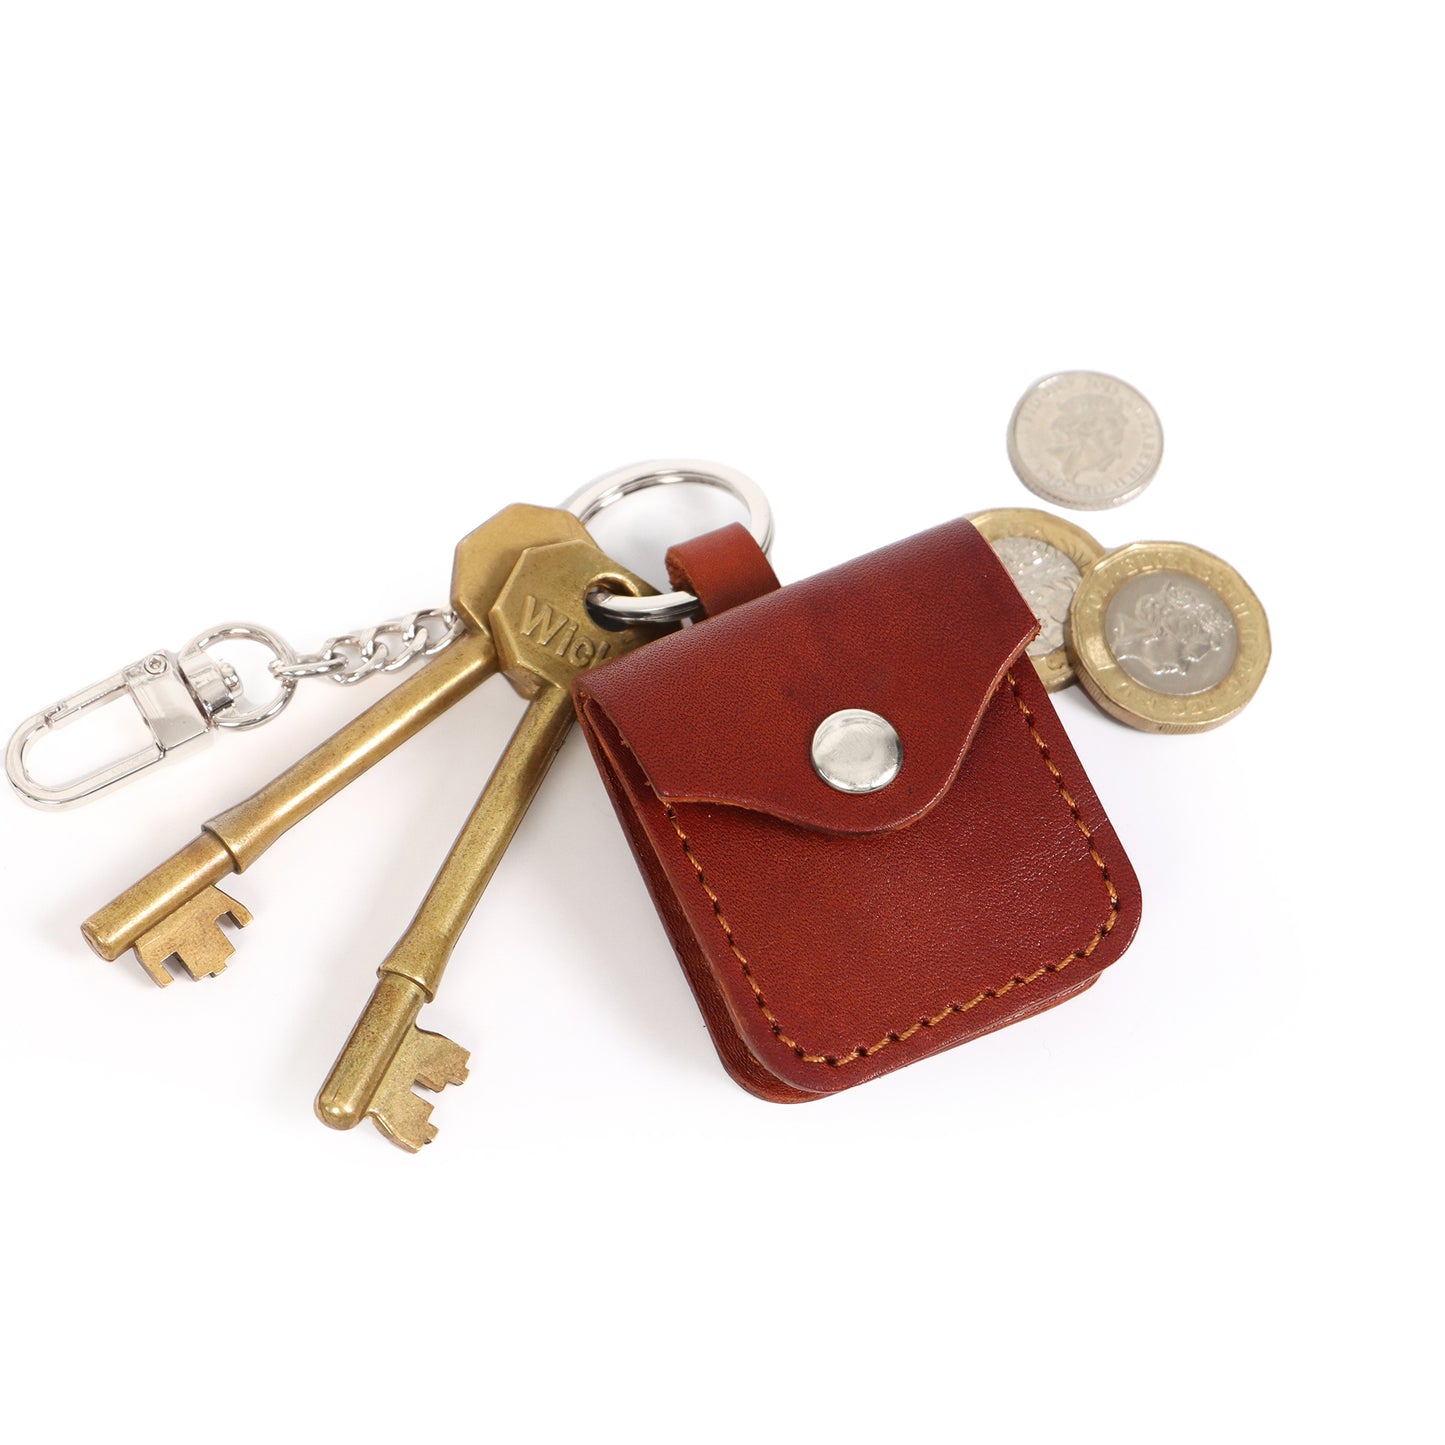 Leather Coin Purse Keychain Leather Coin Case